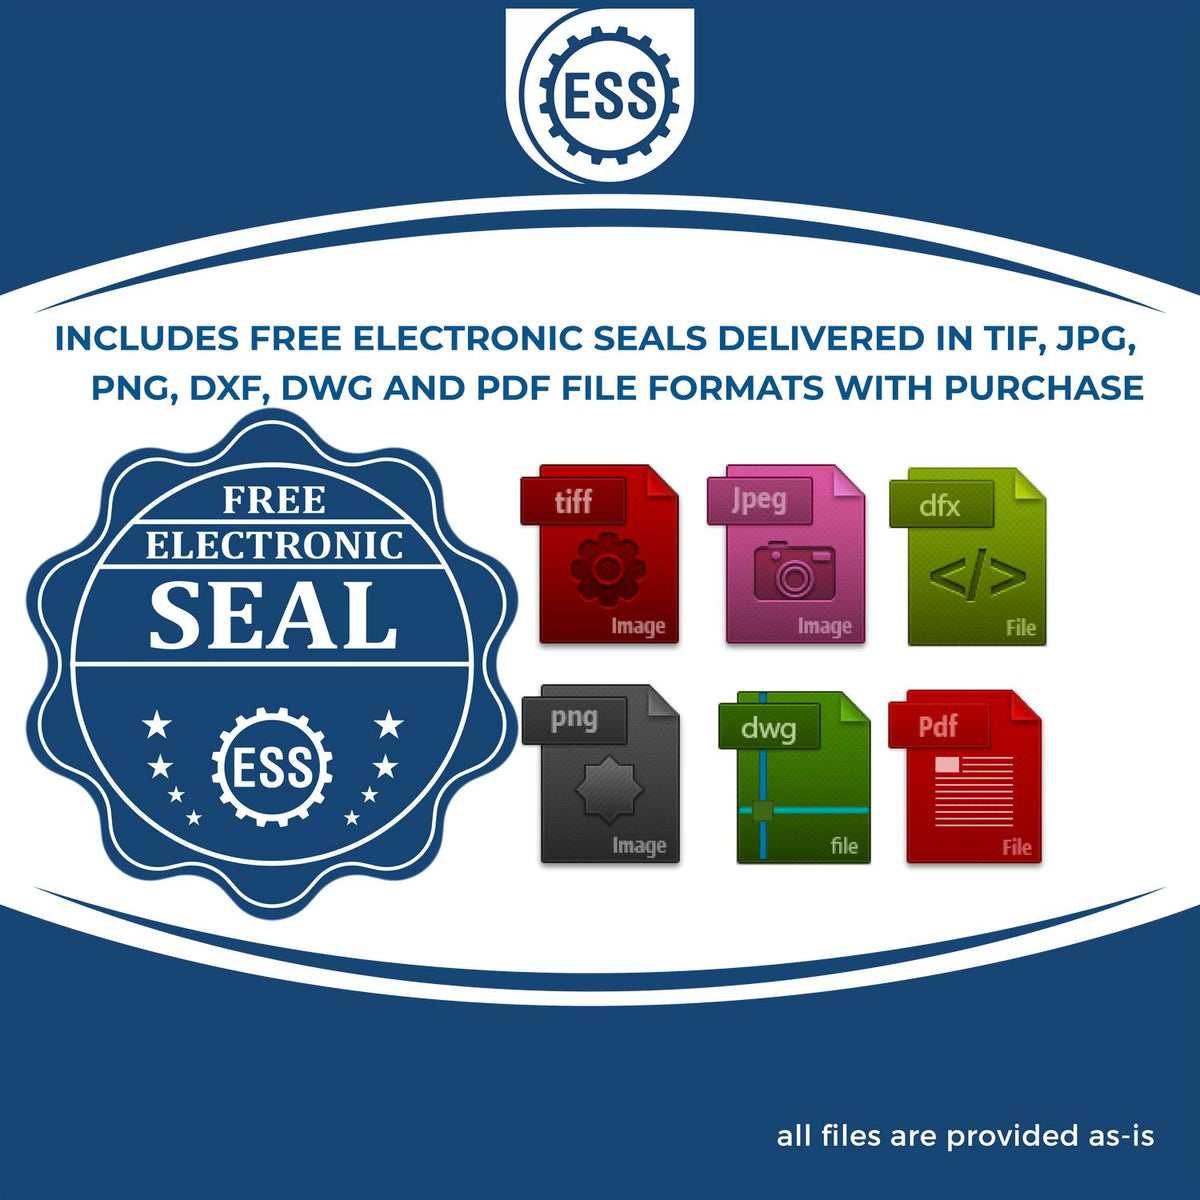 An infographic for the free electronic seal for the Slim Pre-Inked Idaho Architect Seal Stamp illustrating the different file type icons such as DXF, DWG, TIF, JPG and PNG.